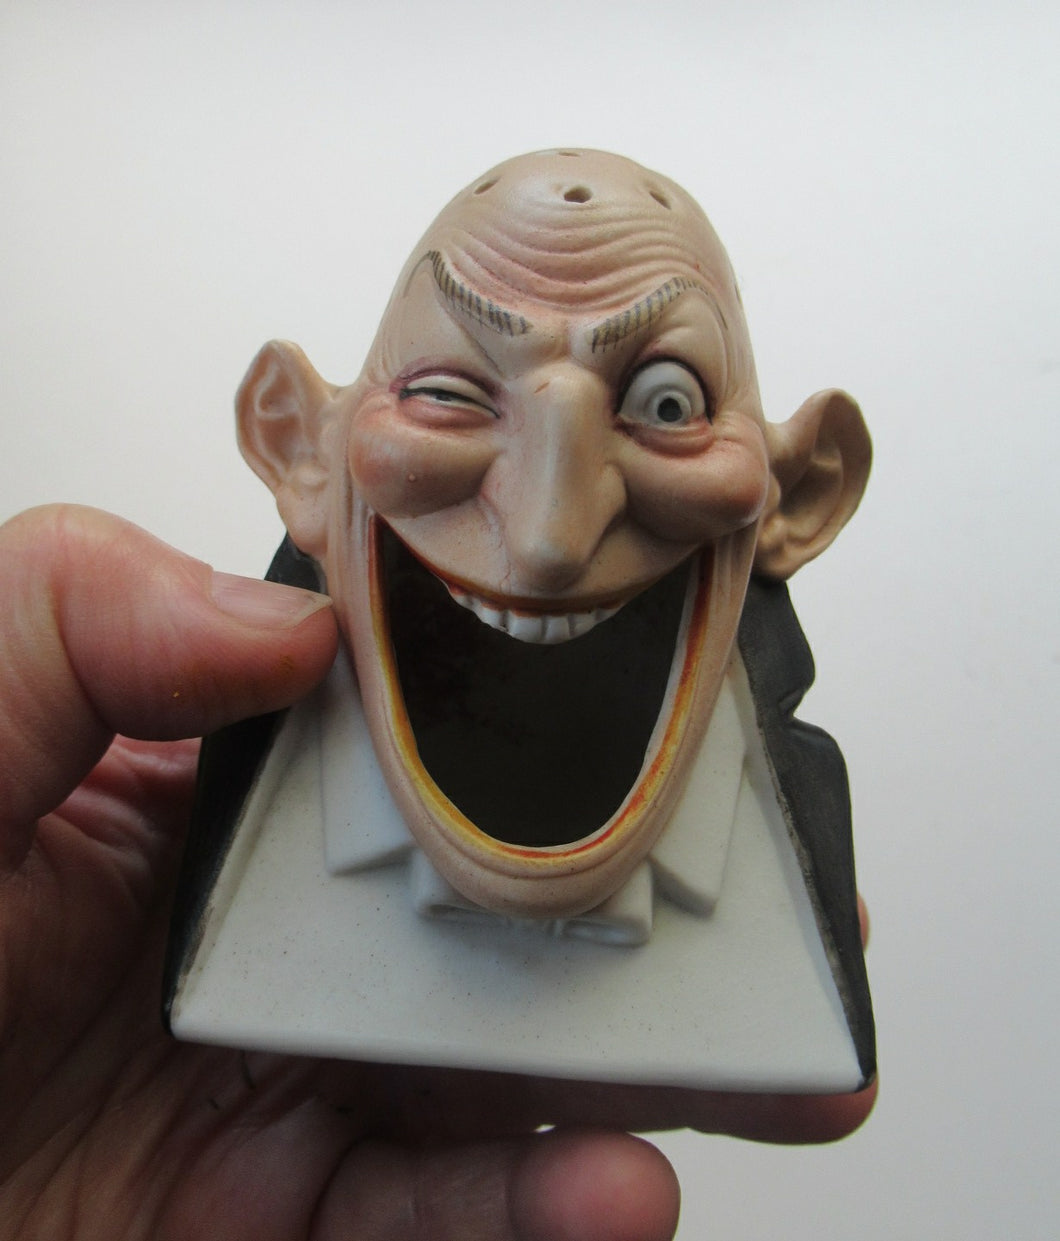 Antique Porcelain SMOKING Ashtray and Match Holder by Schafer & Vater. UGLY GRIN